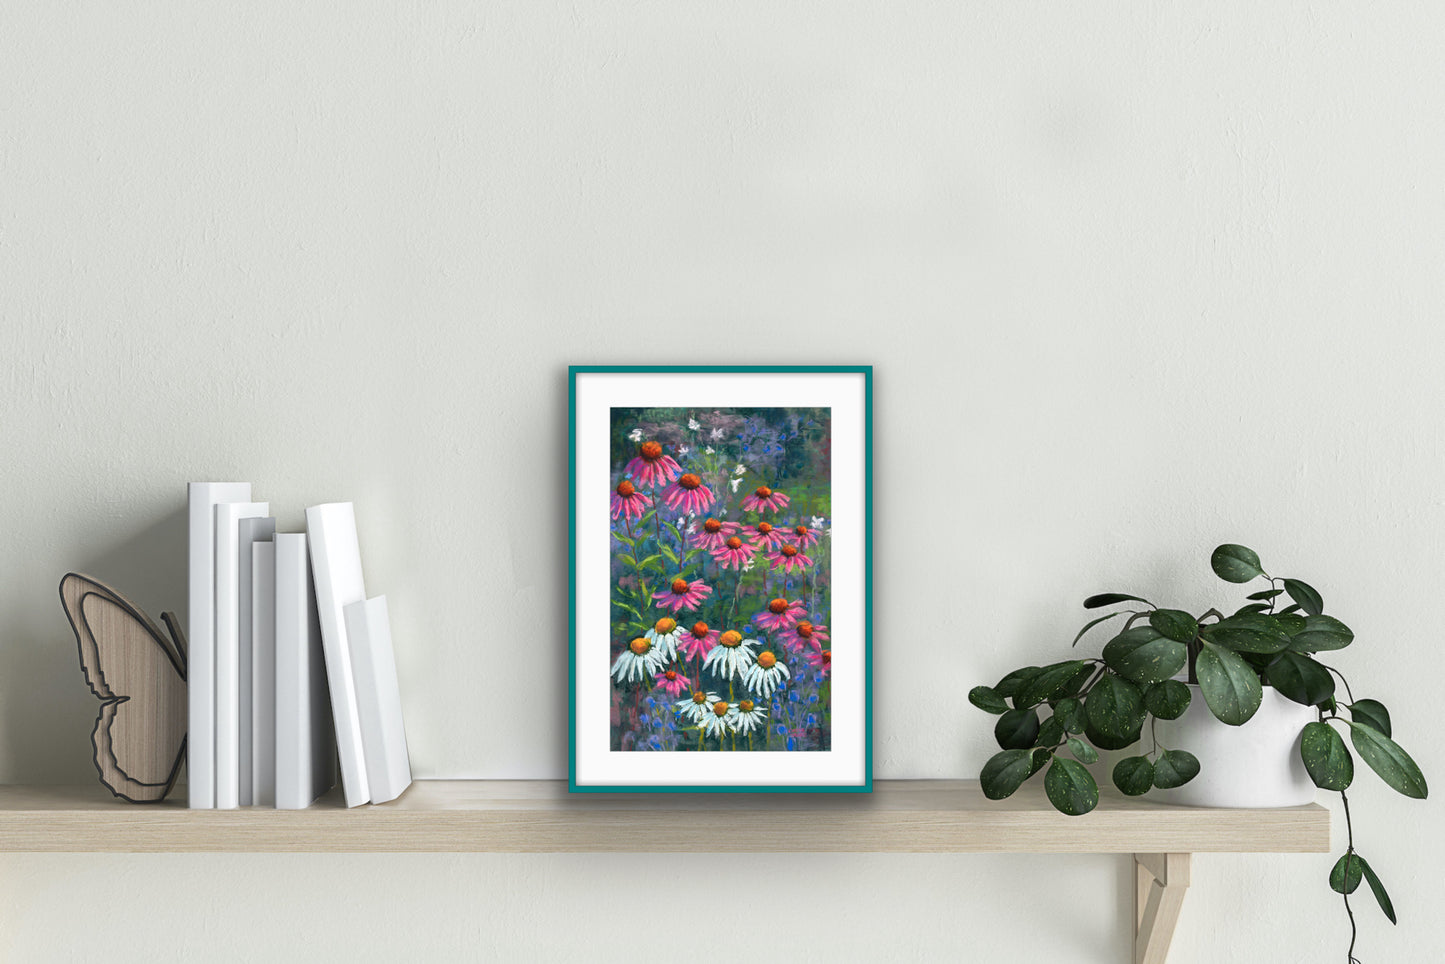 Echinaceas and Daisies, Fine Art Giclee Limited Edition Print